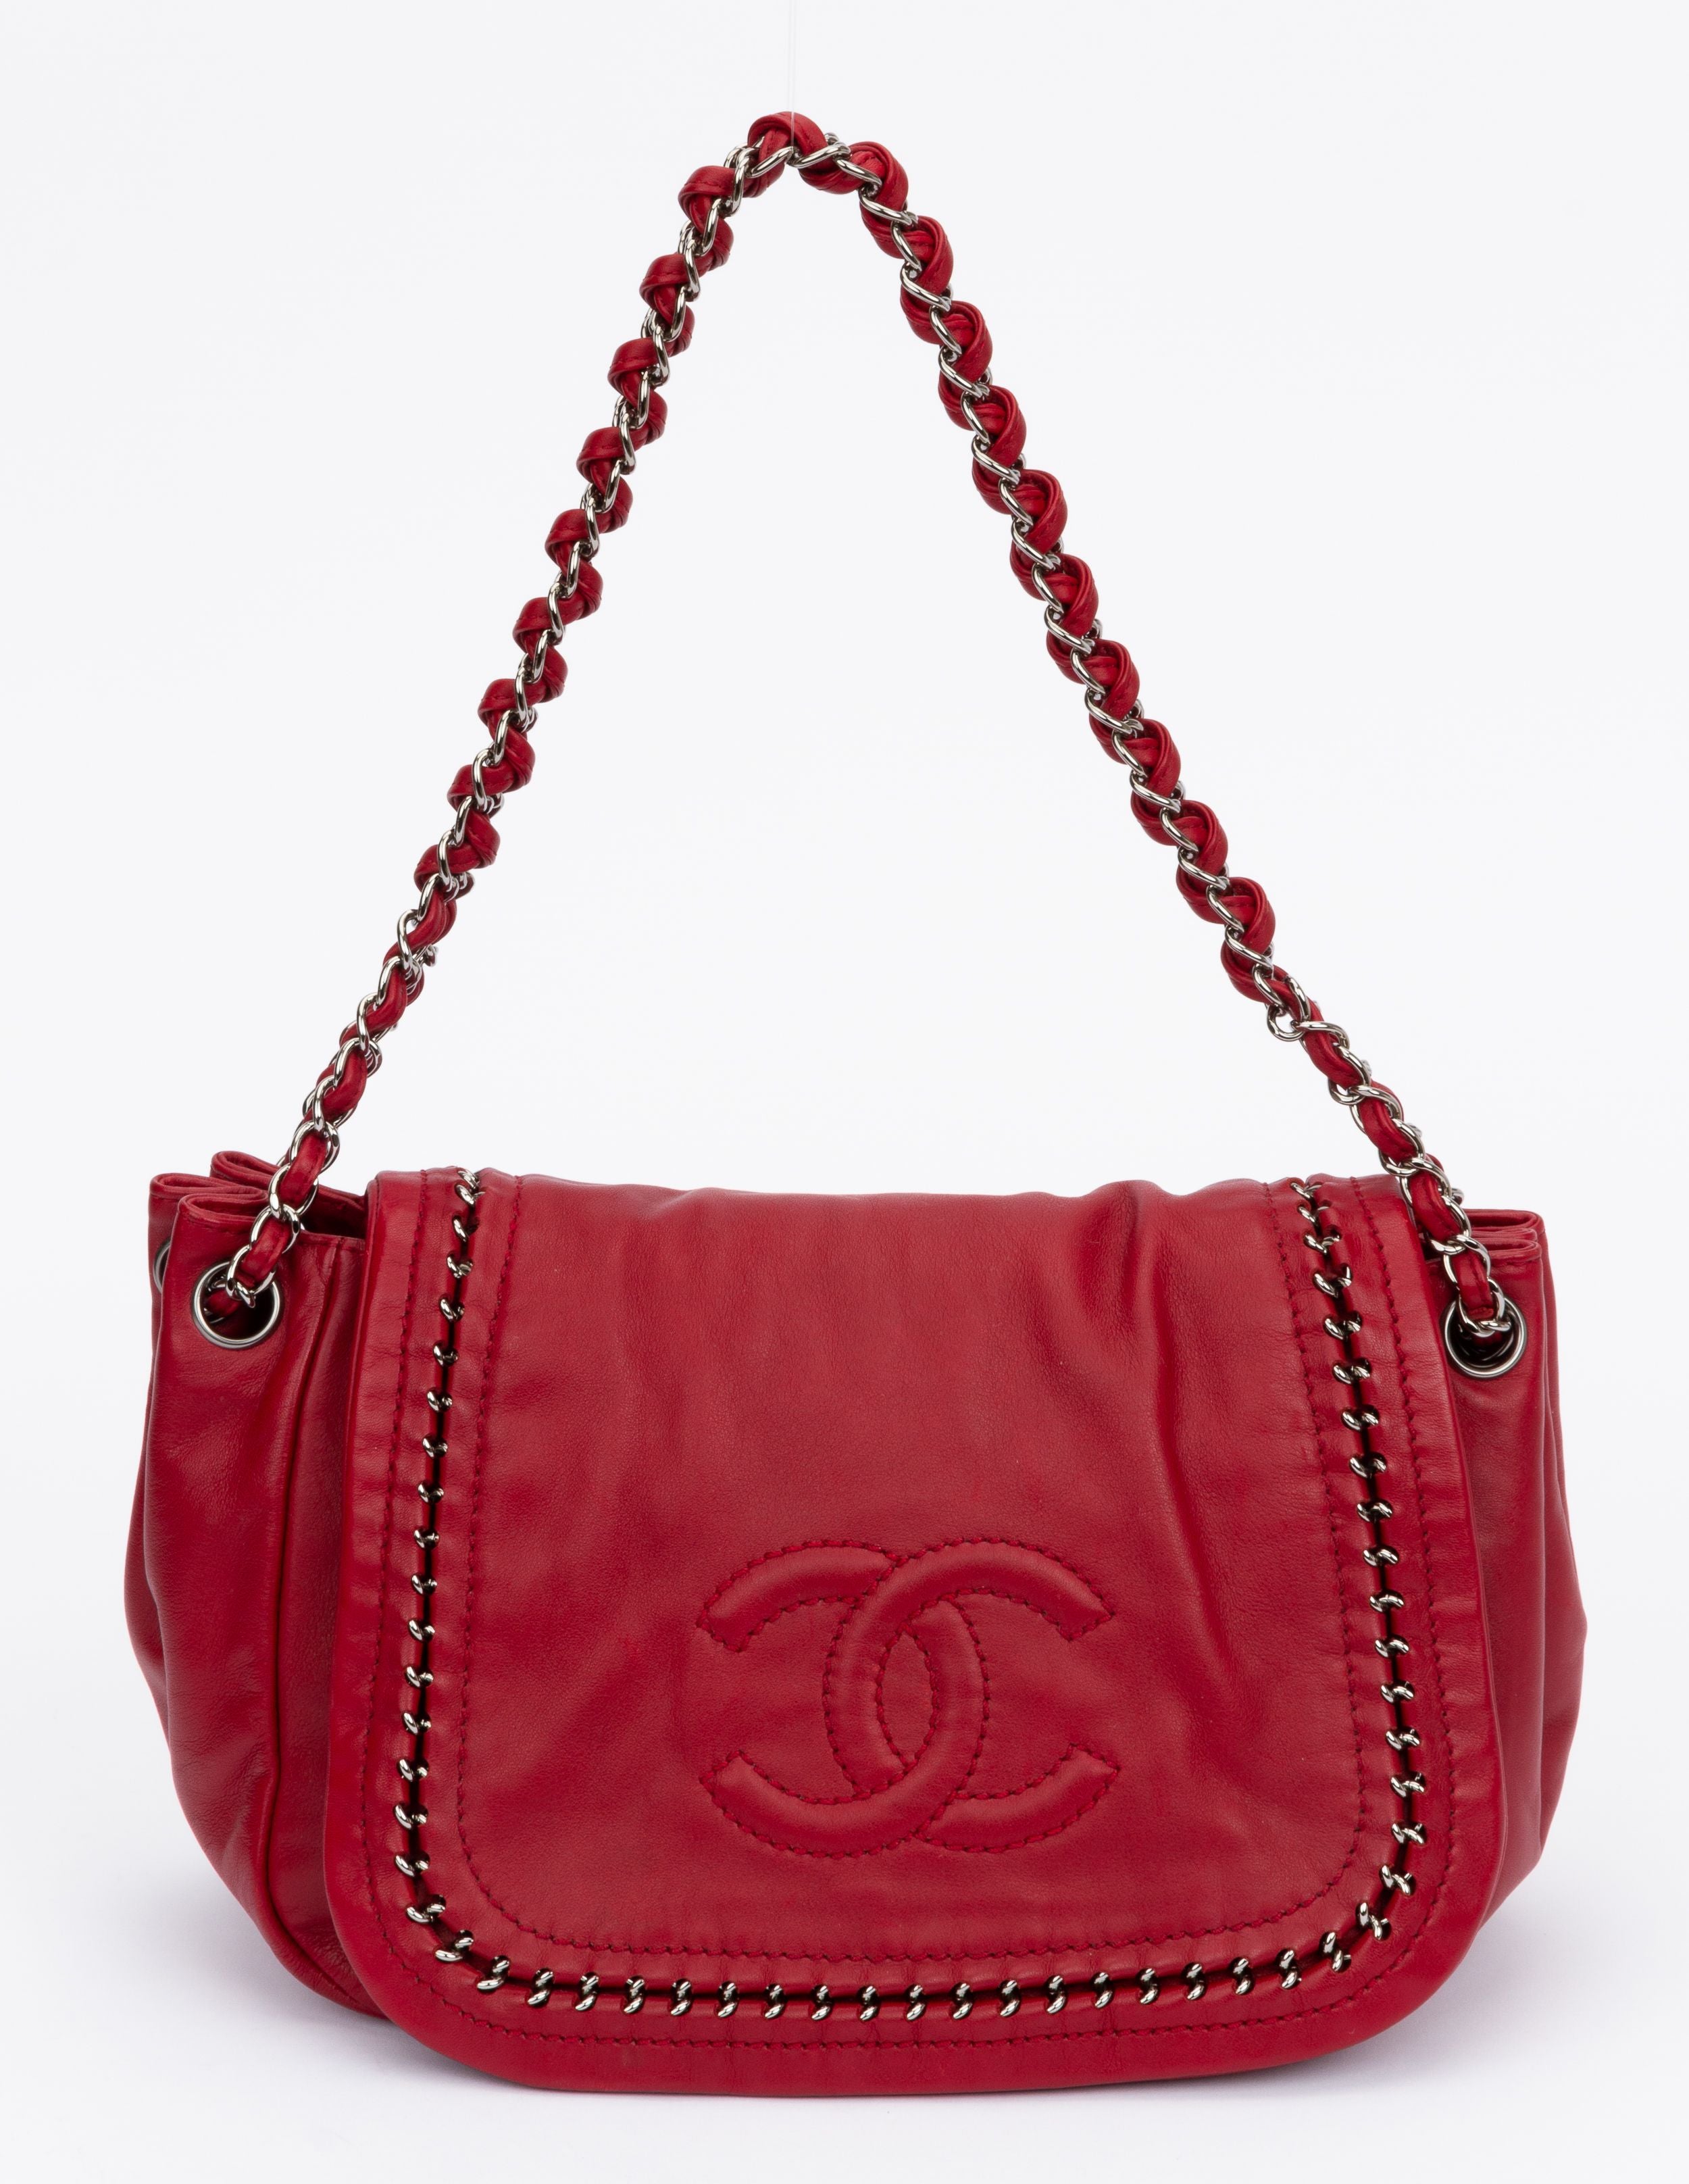 Vintage Red Logo Hologram Bag with Gold Chain by Chanel